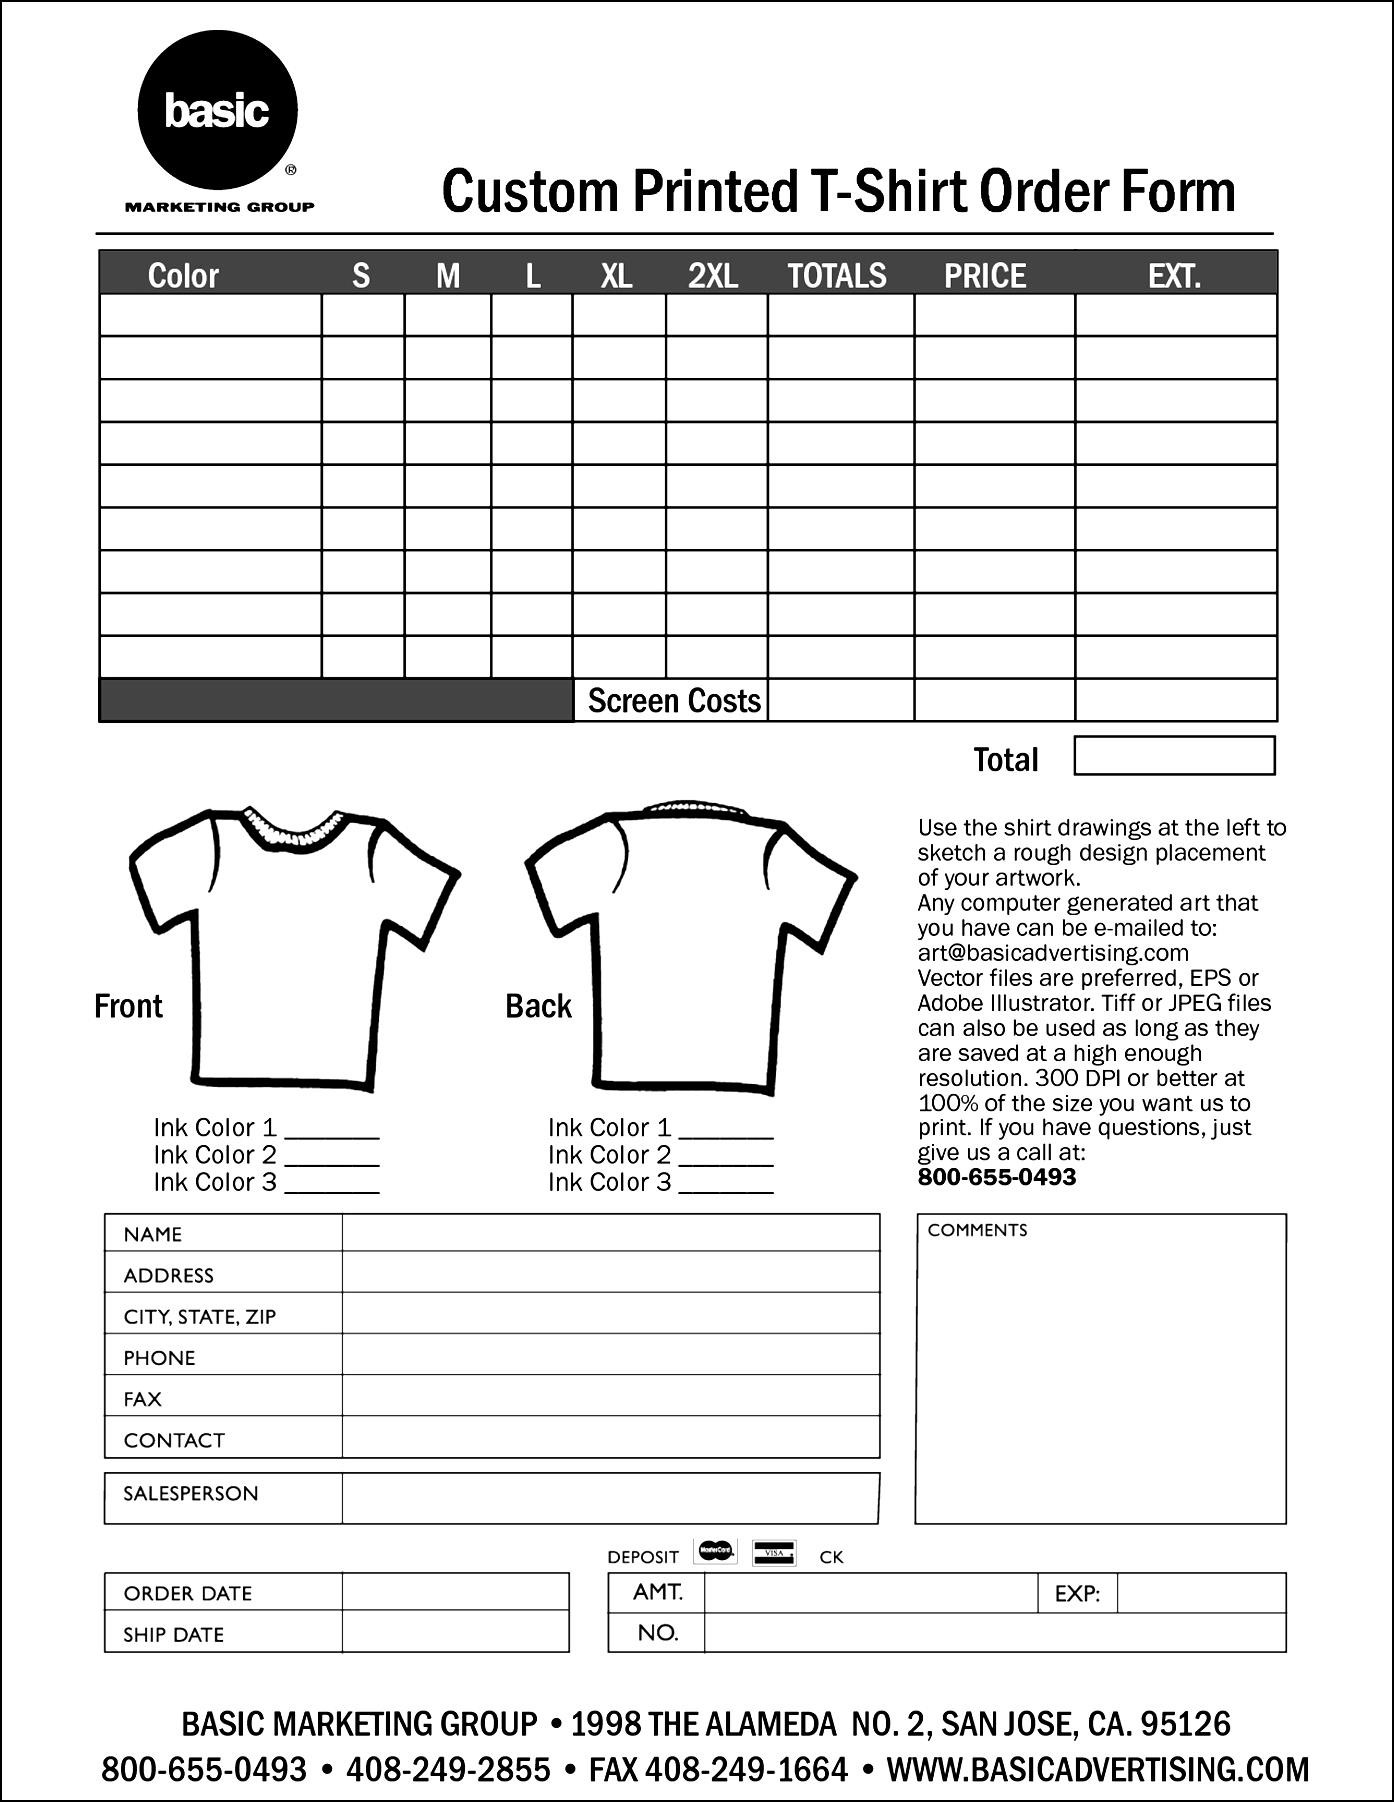 Free Tshirt Order Form Template amulette